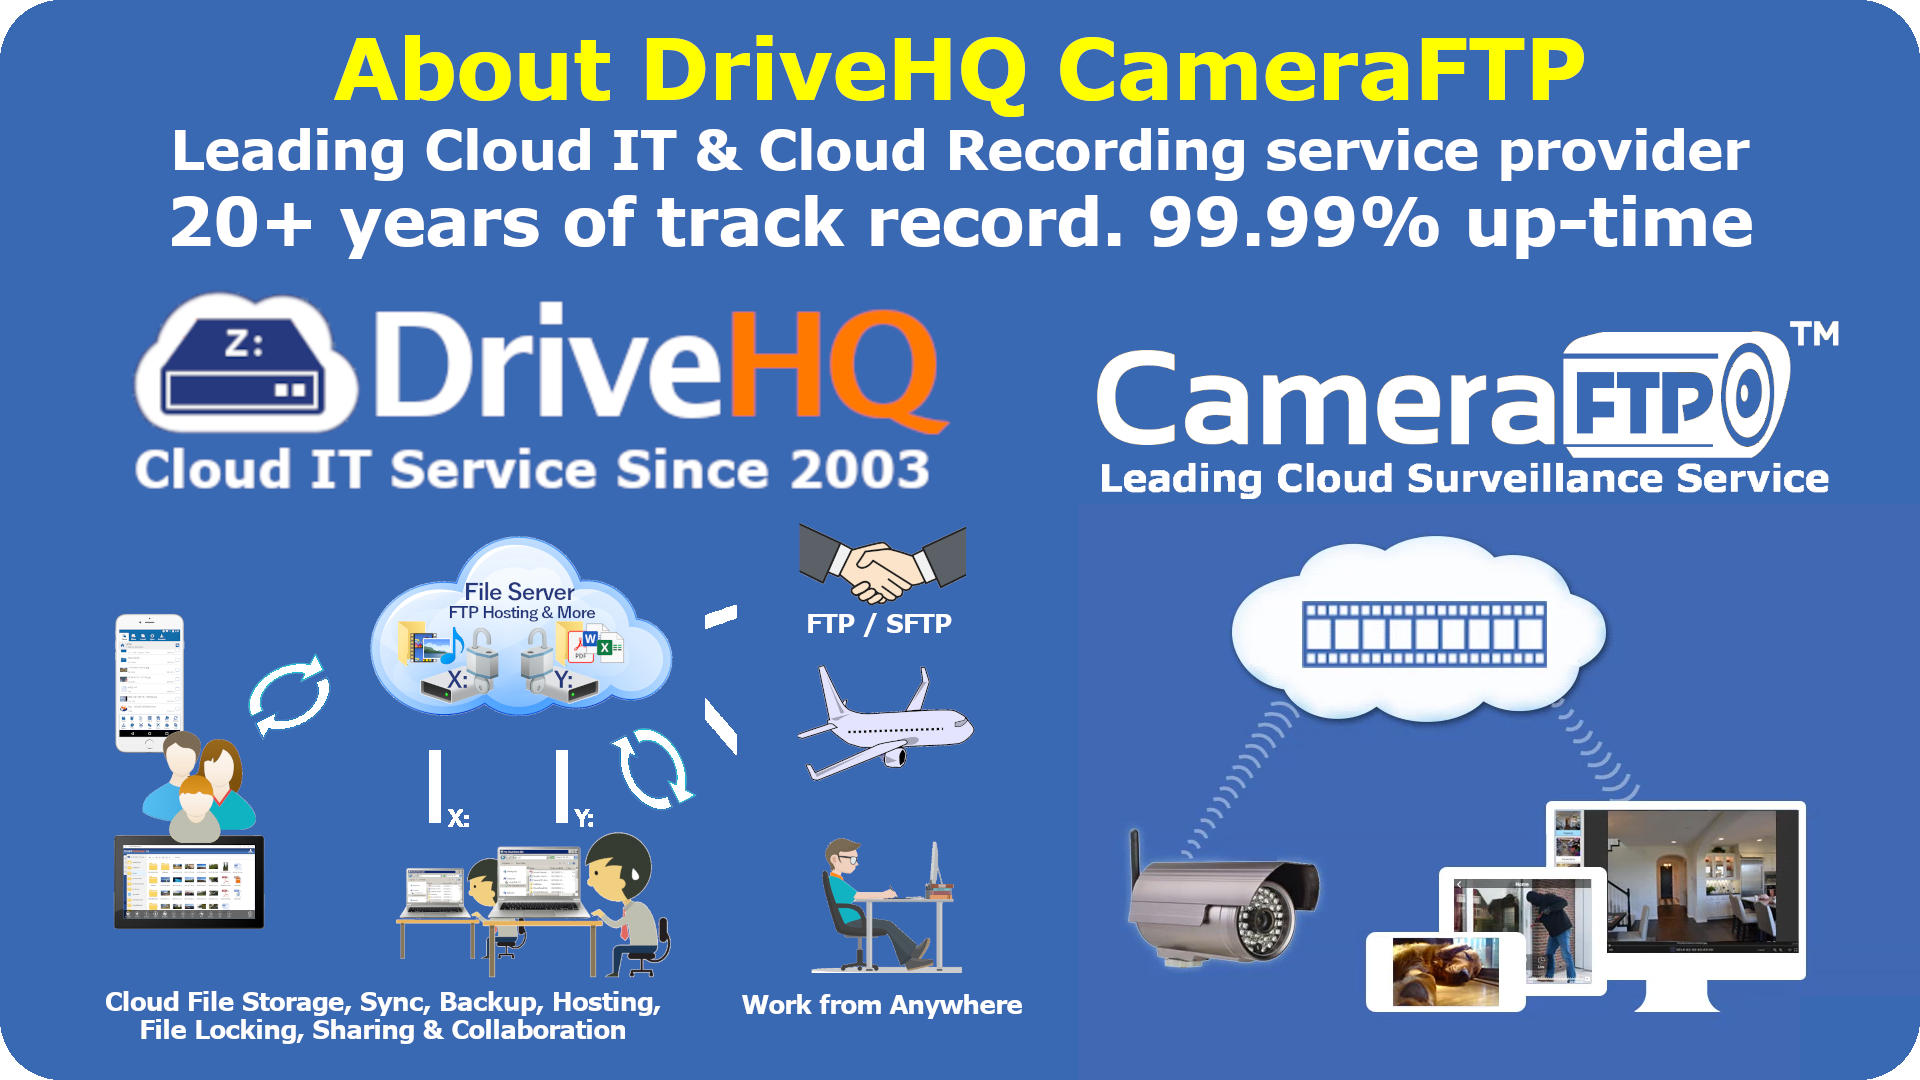 DriveHQ is a leading cloud IT service provider founded in 2003. It offers the best cloud file server and FTP/SFTP hosting services. CameraFTP is a DriveHQ division, and a leading cloud recording service provider. DriveHQ has over 20 years of track record. Our up-time is over 99.99%